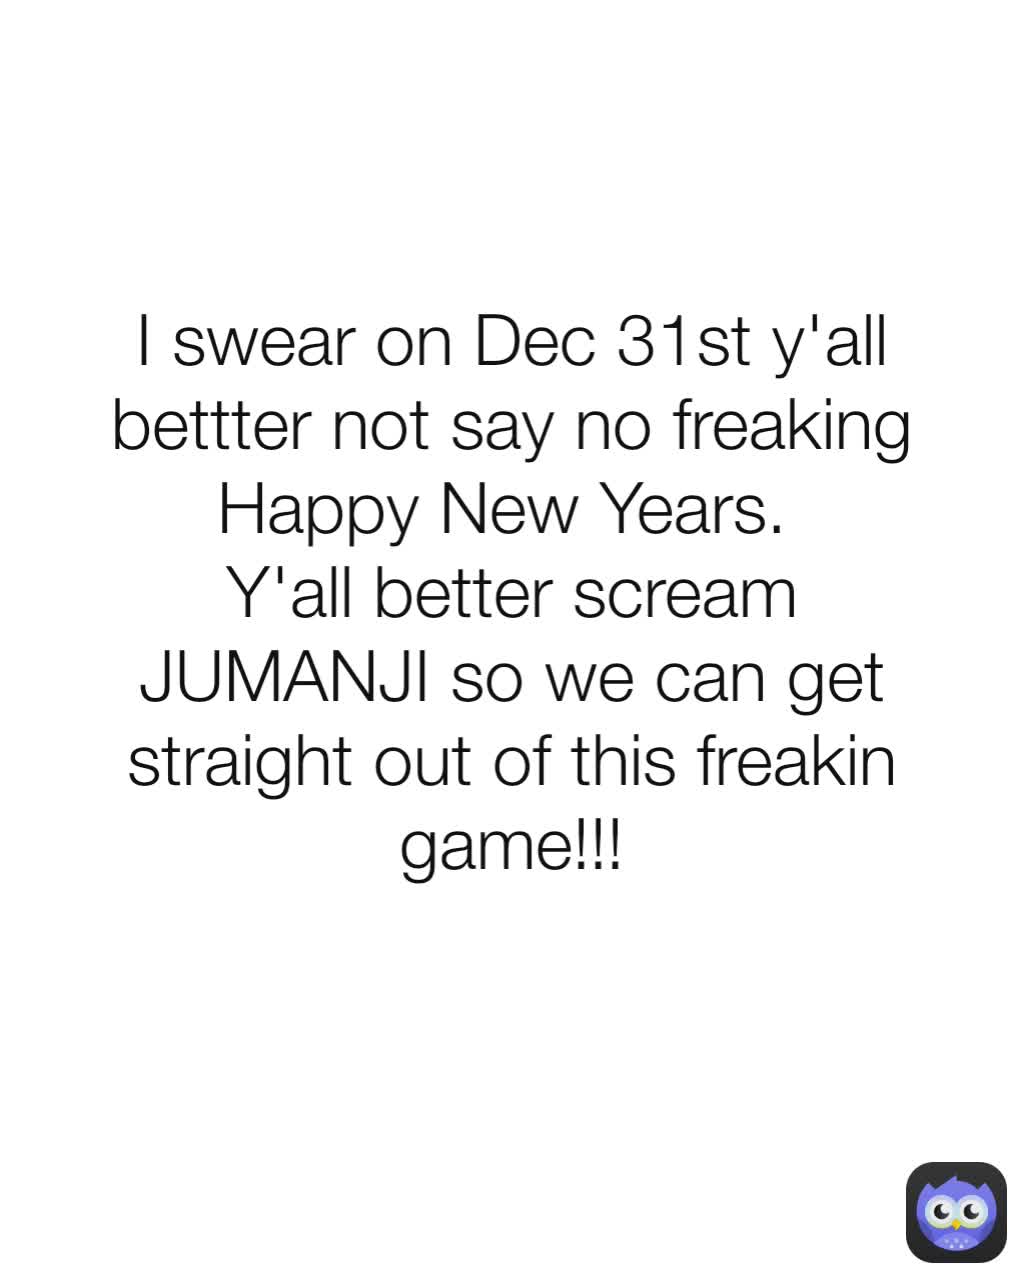 I swear on Dec 31st y'all bettter not say no freaking Happy New Years. 
Y'all better scream JUMANJI so we can get straight out of this freakin game!!!